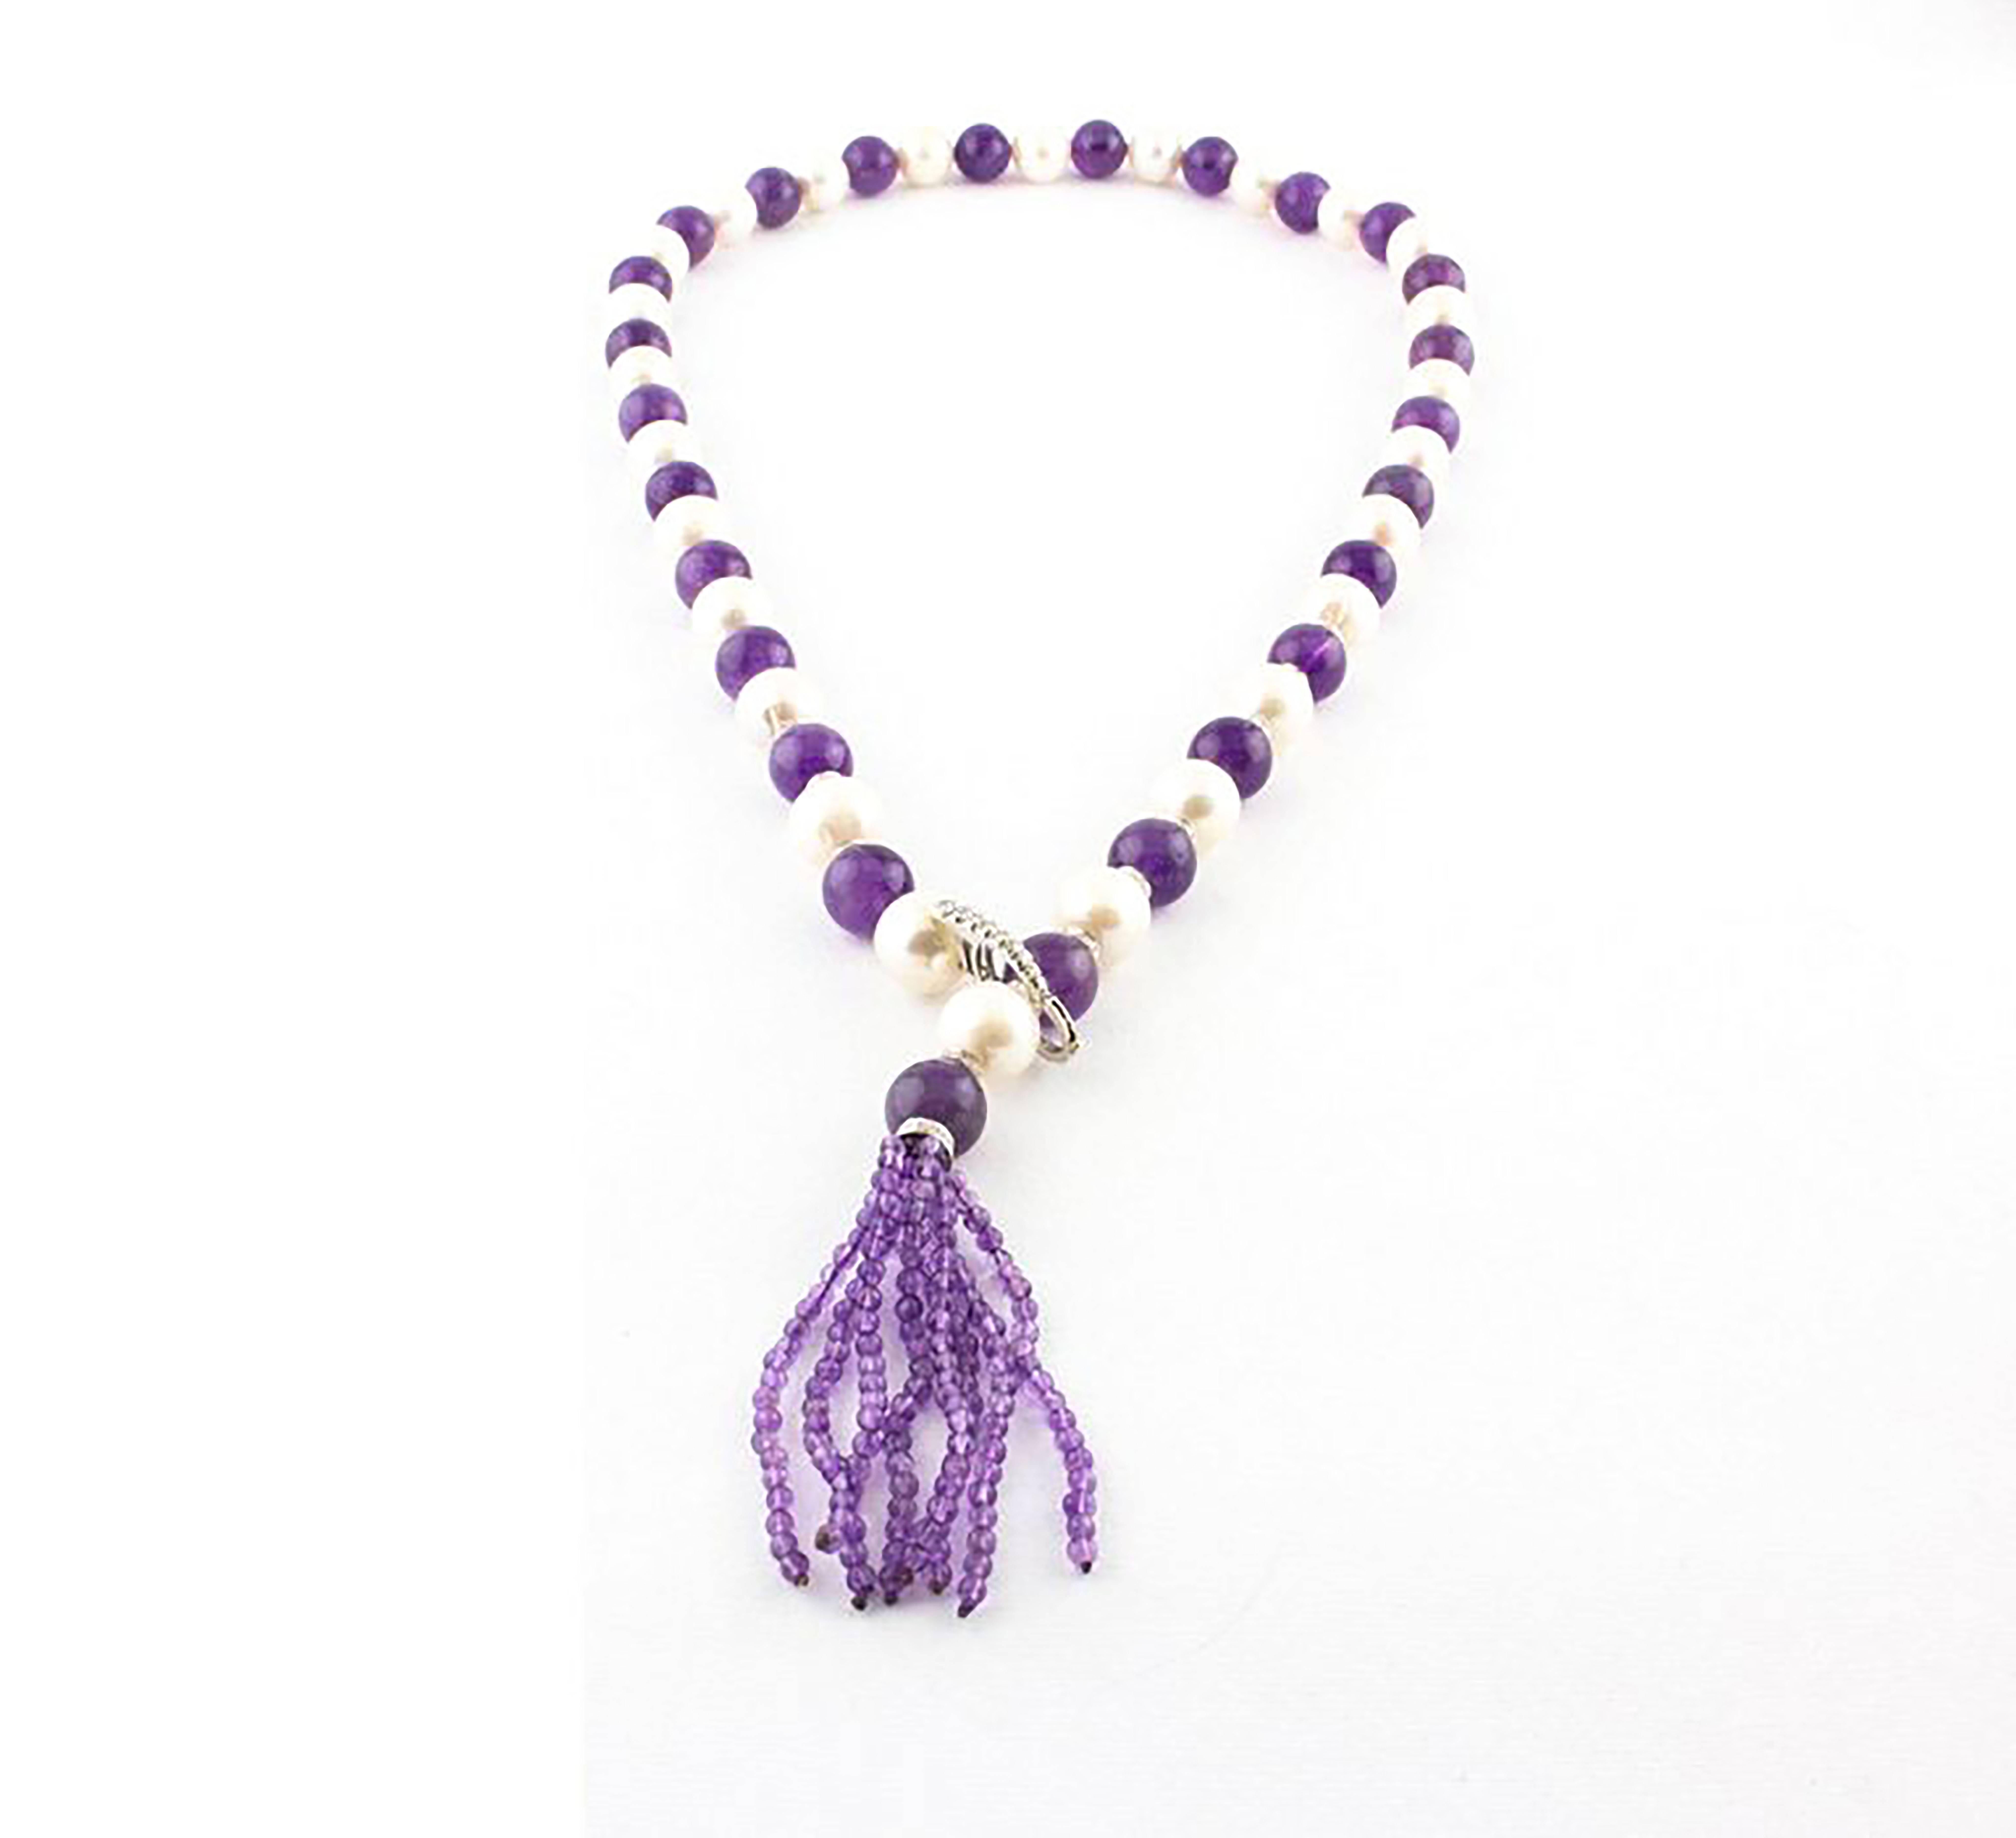 SHIPPING POLICY:
No additional costs will be added to this order.
Shipping costs will be totally covered by the seller (customs duties included).

Elegant pearls and amethysts necklace enriched with washers and particular in white gold and diamonds